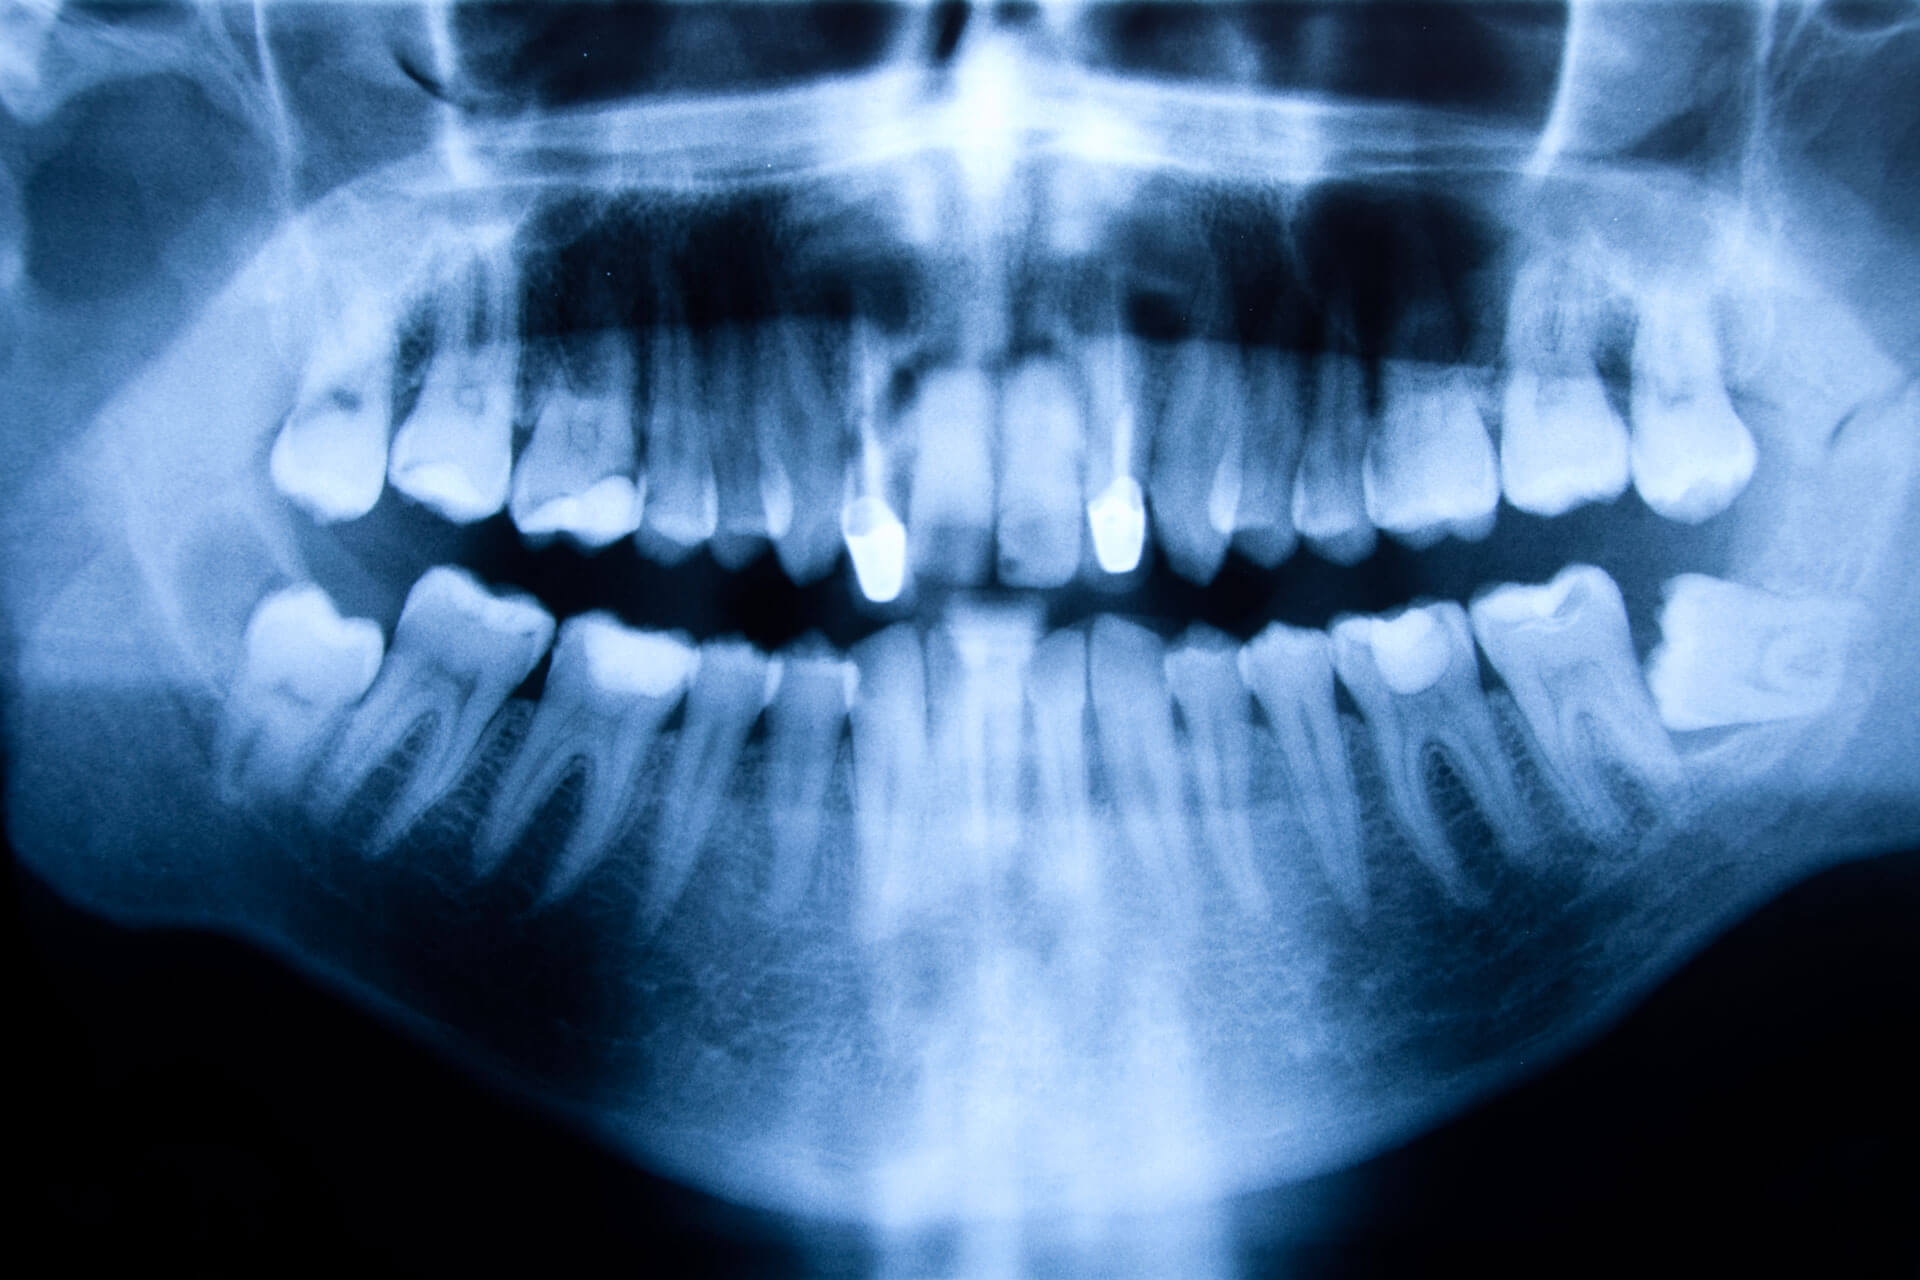 An x-ray of a child's mouth.